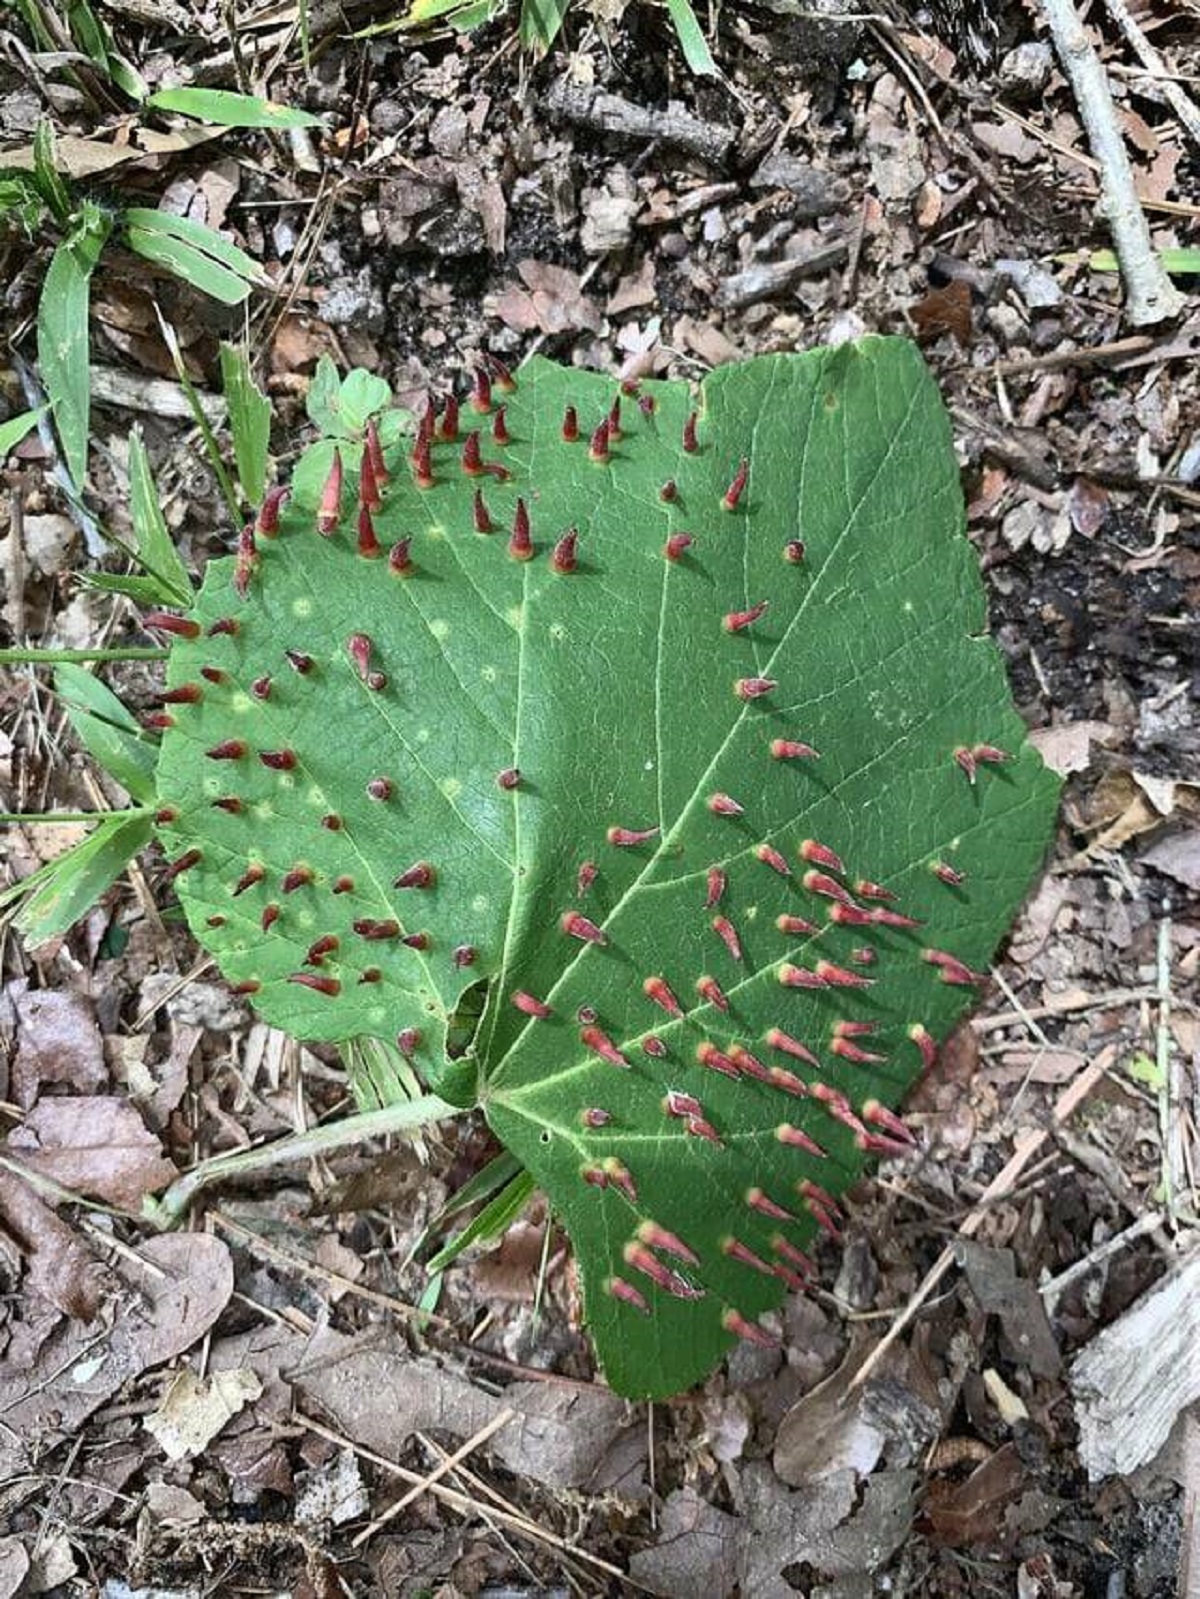 "This leaf had weird red spikes all over it"